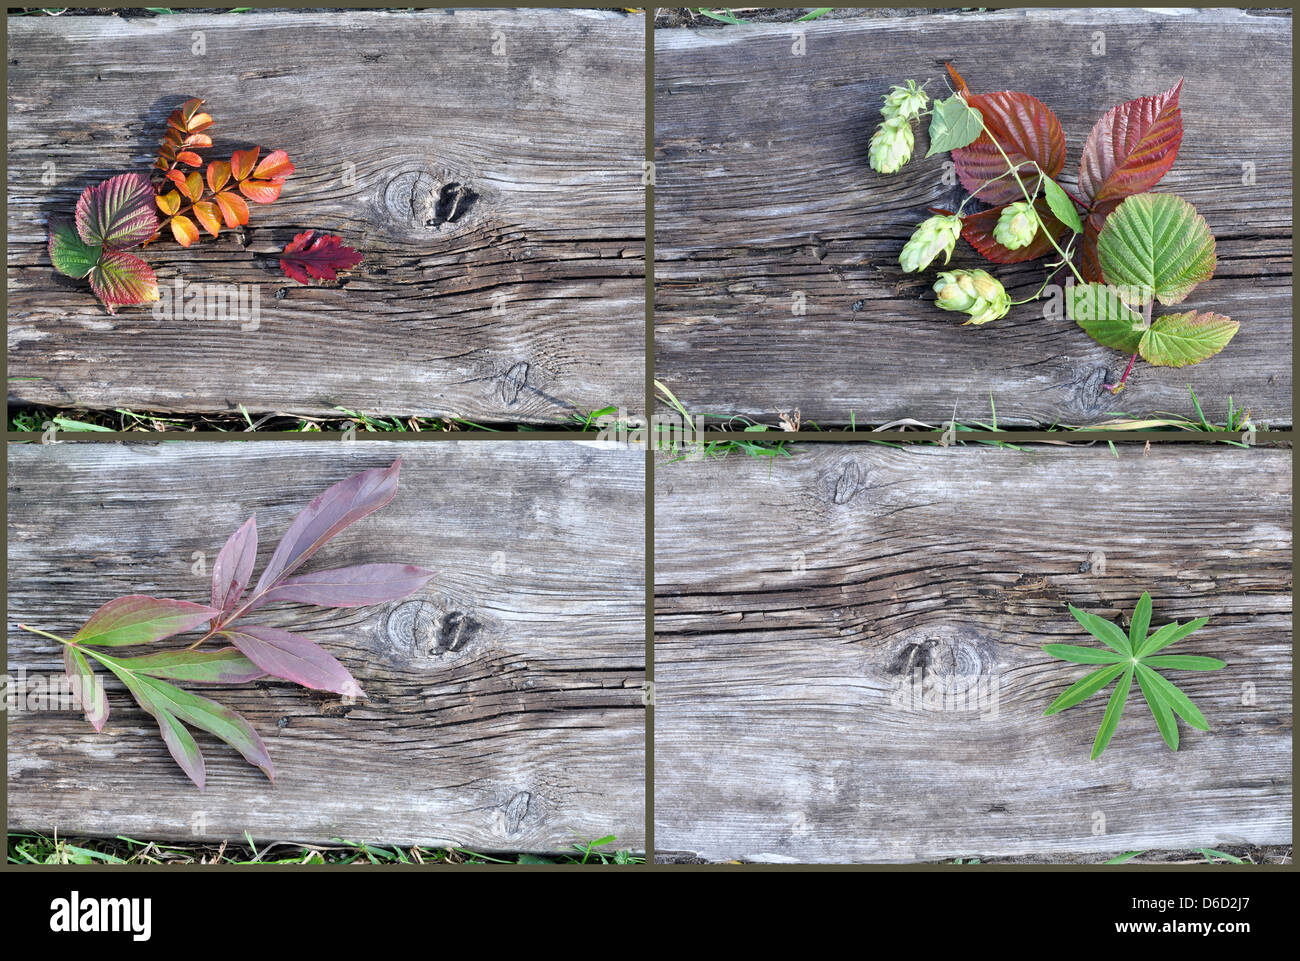 Plants on an old wooden board Stock Photo